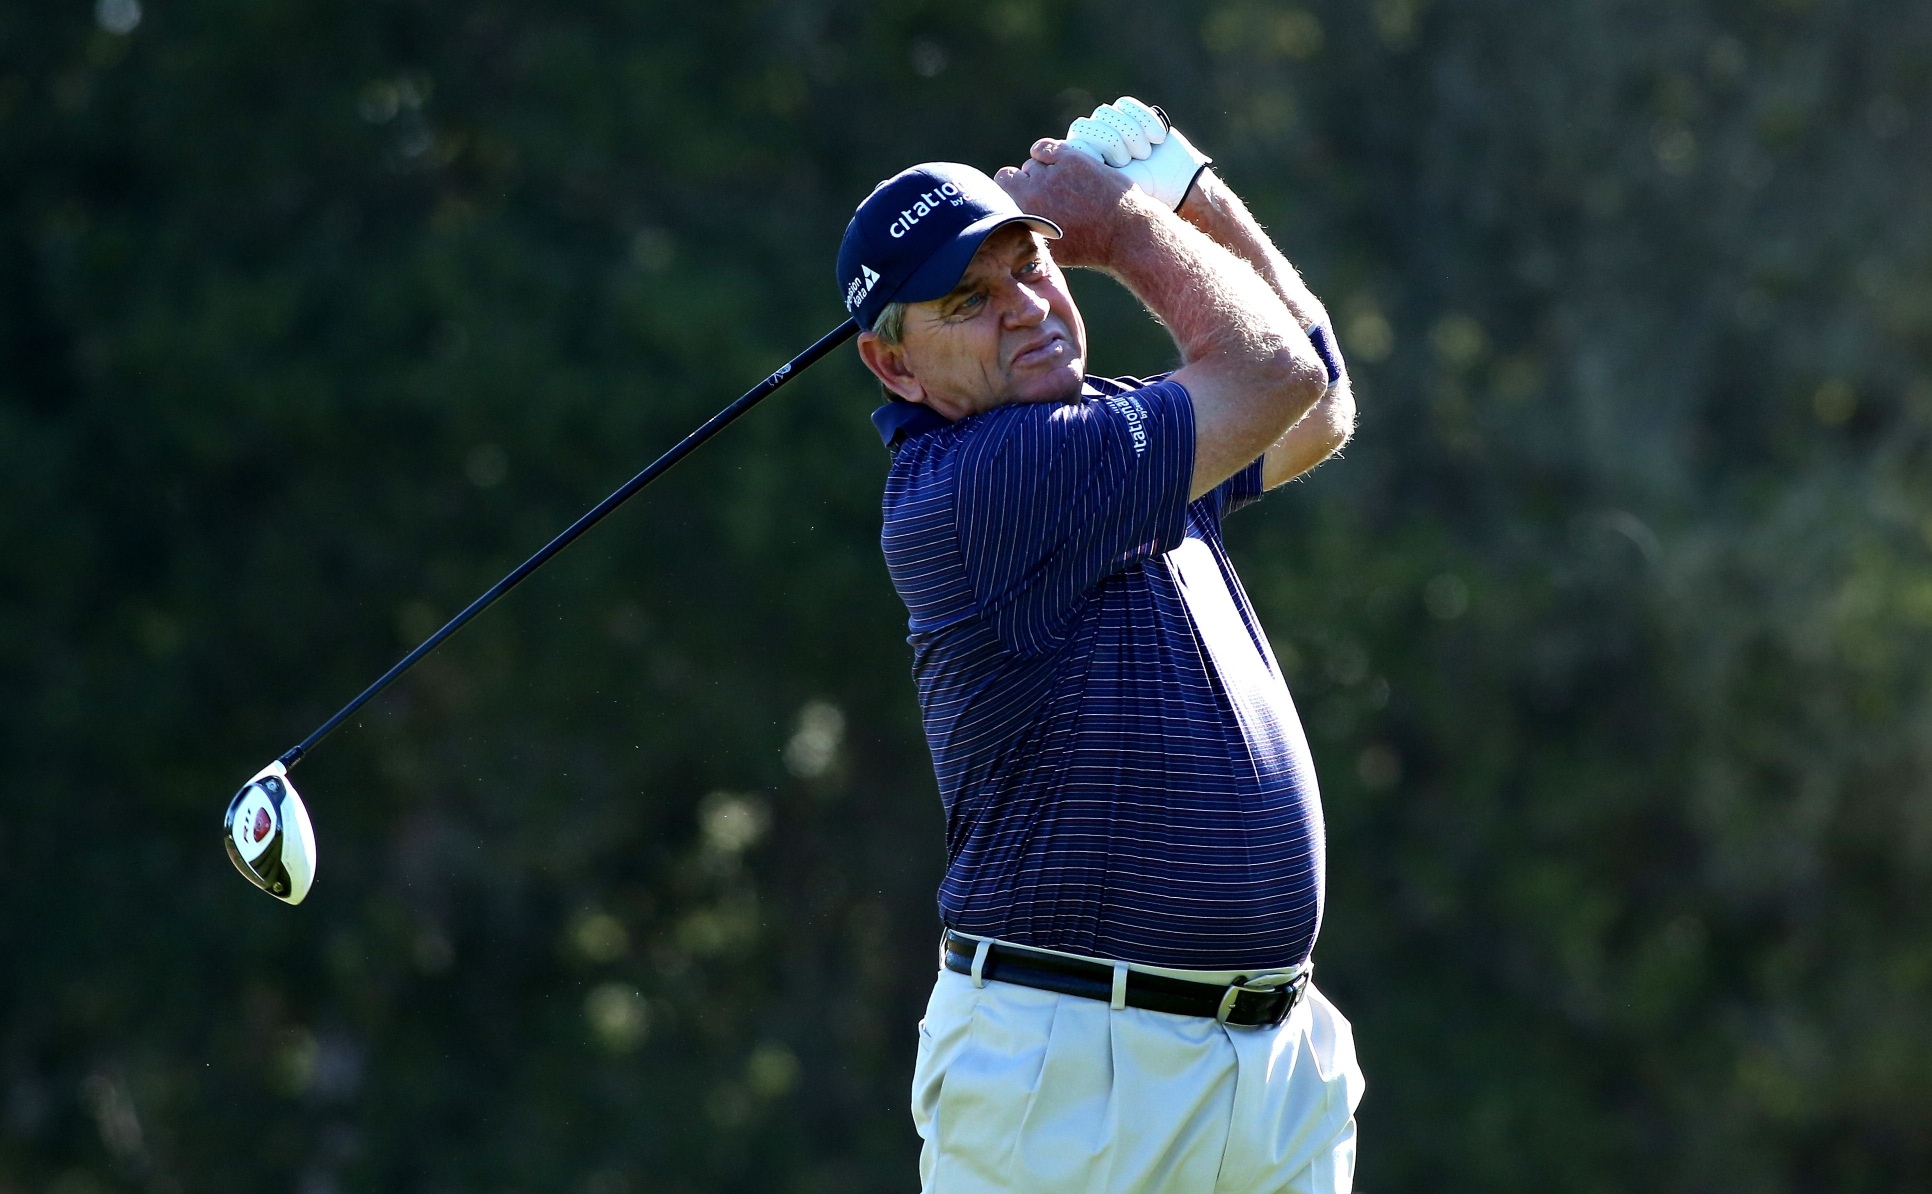 Nick Price says the Presidents Cup will become more exciting. Photo: AFP